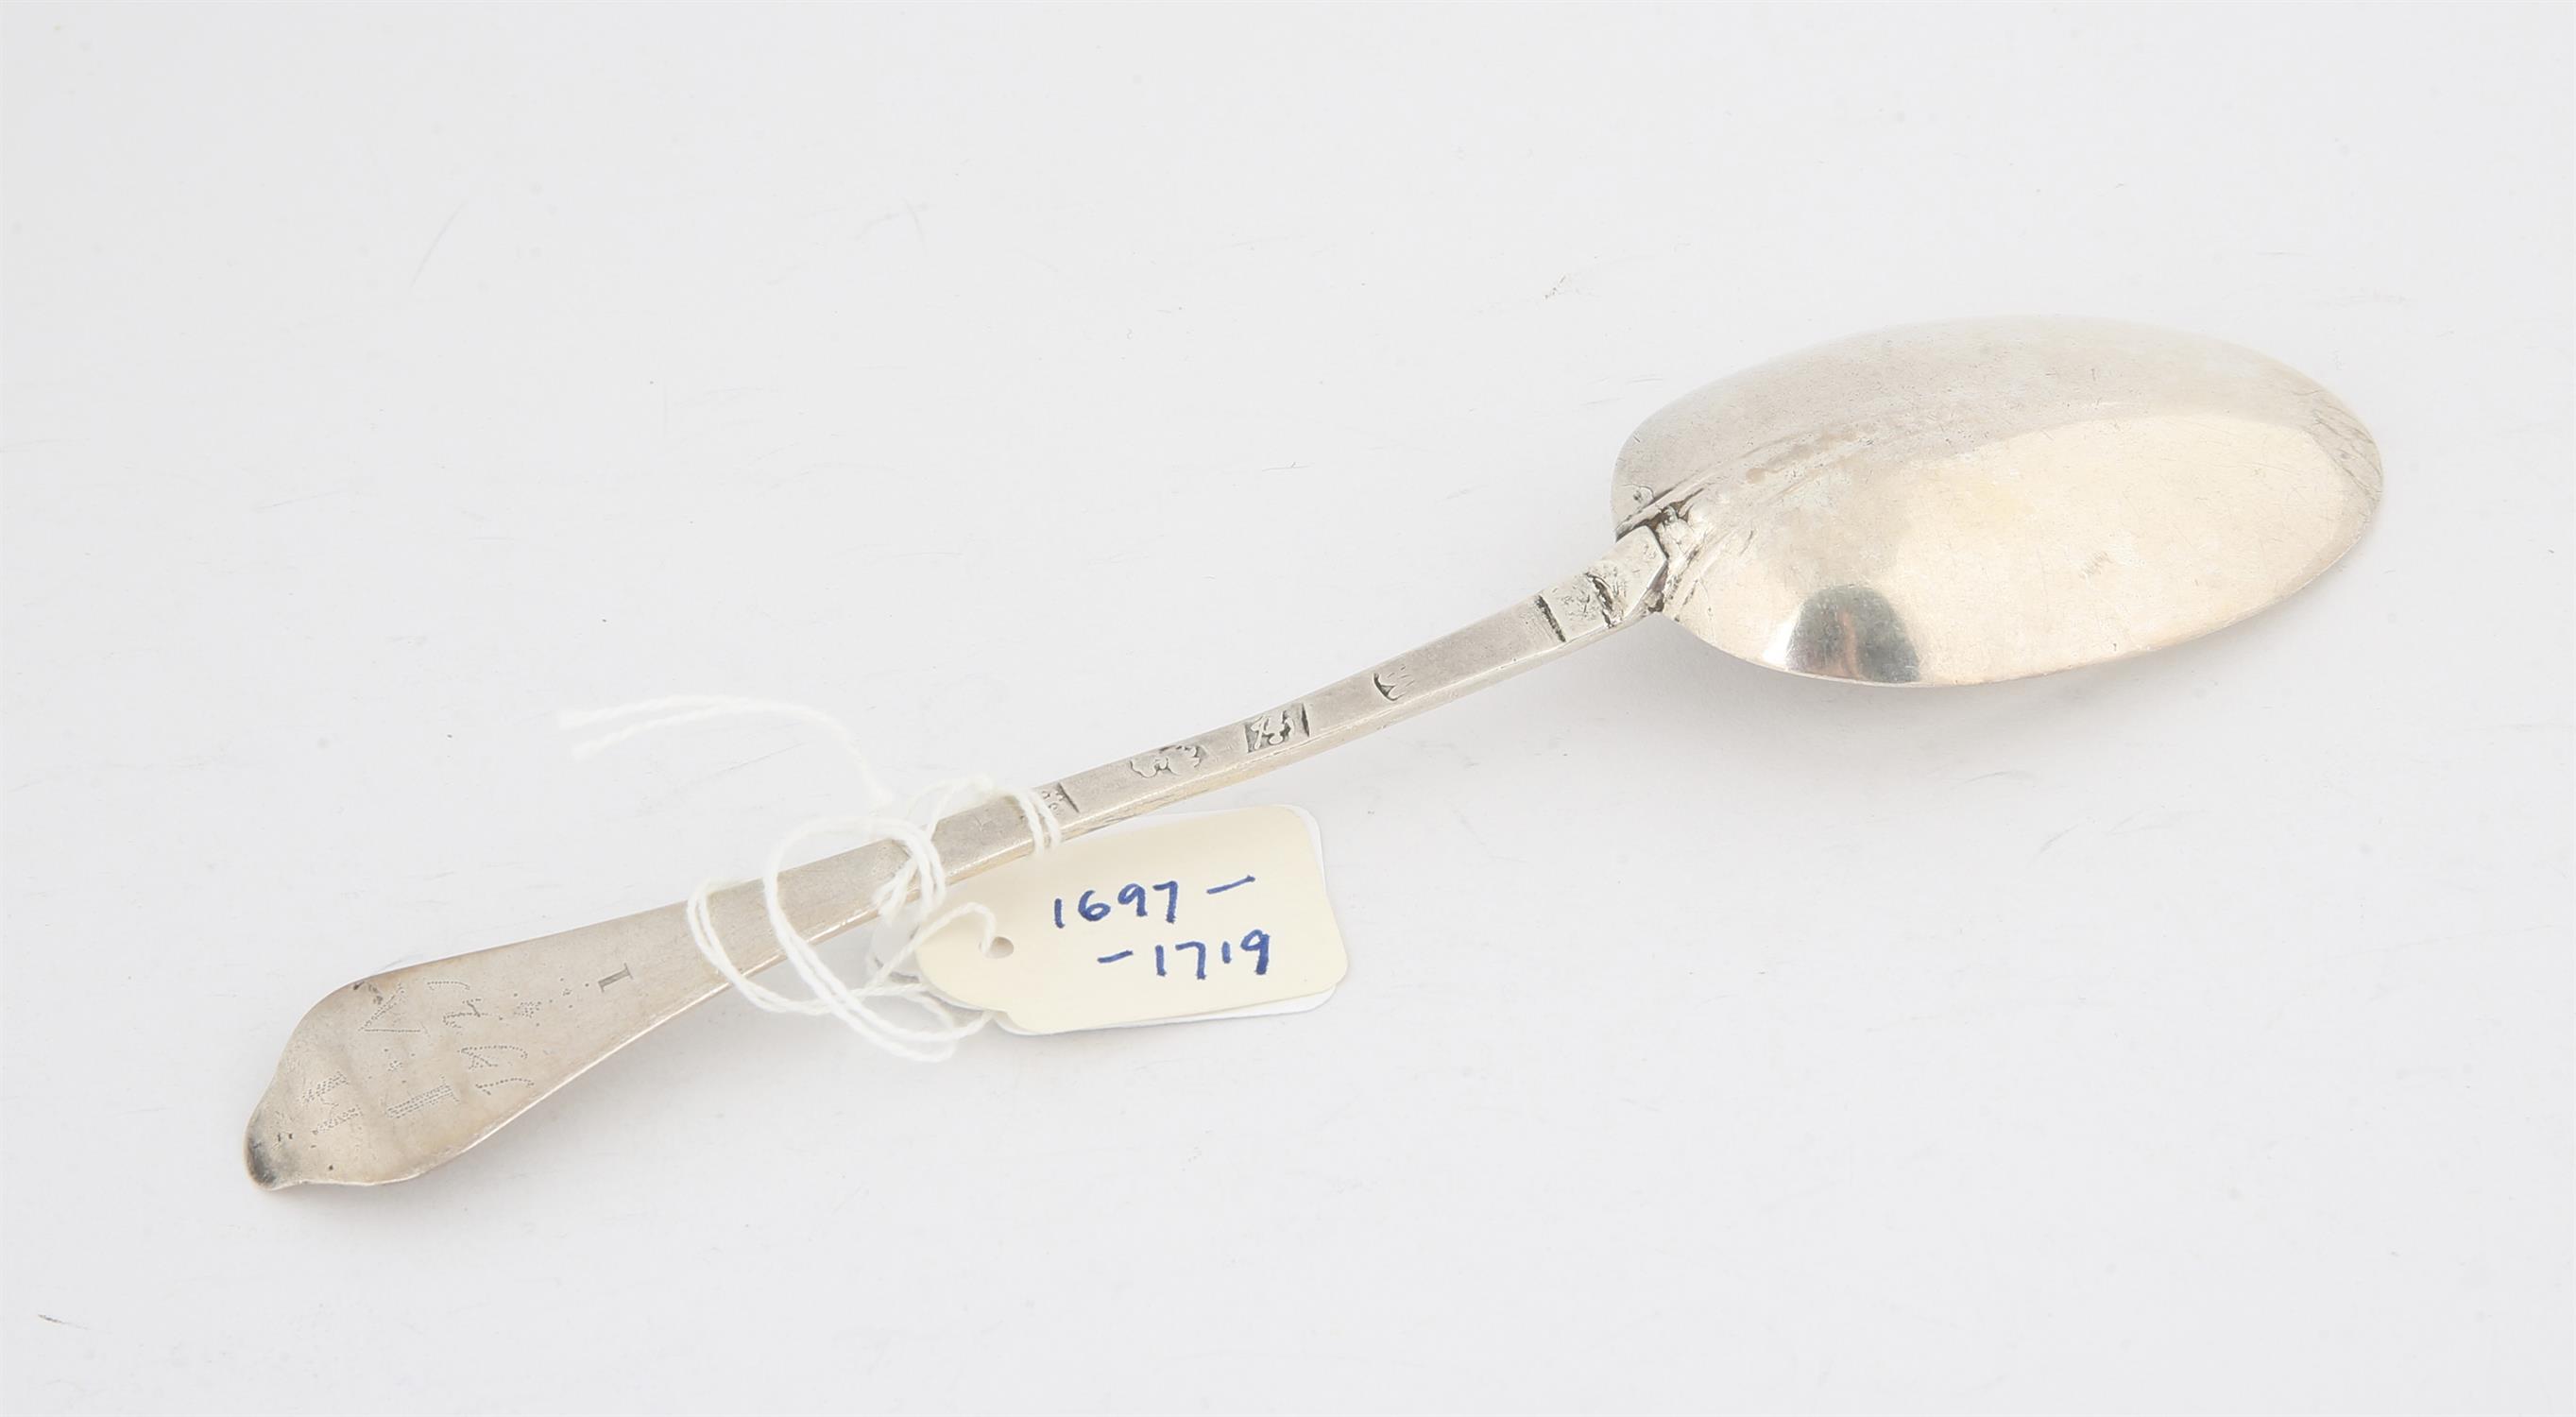 Dog nose silver spoon, marks indistinct but probably circa 1700 SILVER COLLECTION OF SIR RAY - Image 2 of 2